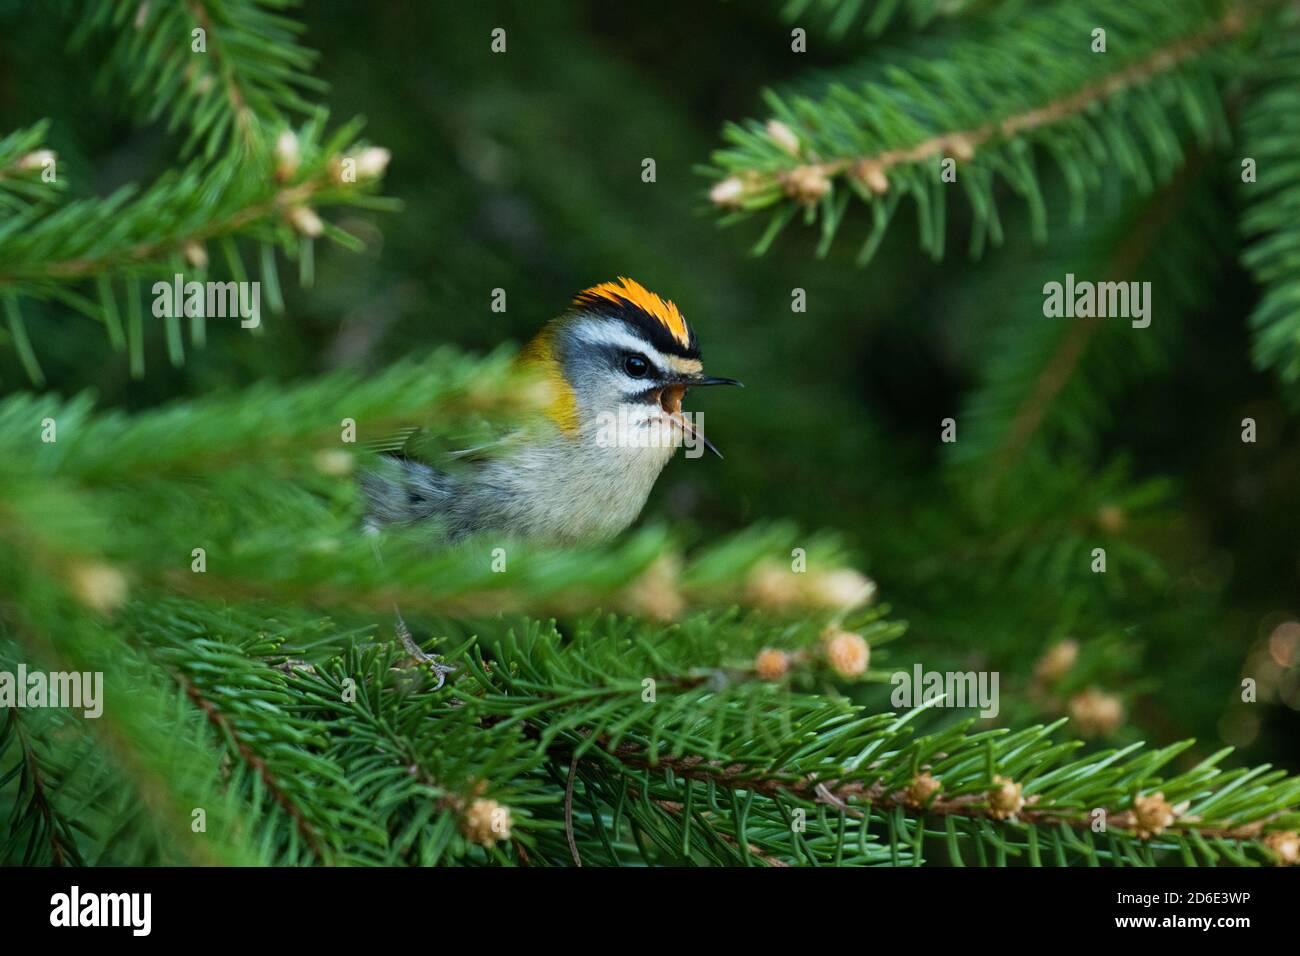 Small European songbird Common Firecrest, Regulus ignicapilla, singing during a breeding season in summer in a boreal forest in Estonian nature. Stock Photo